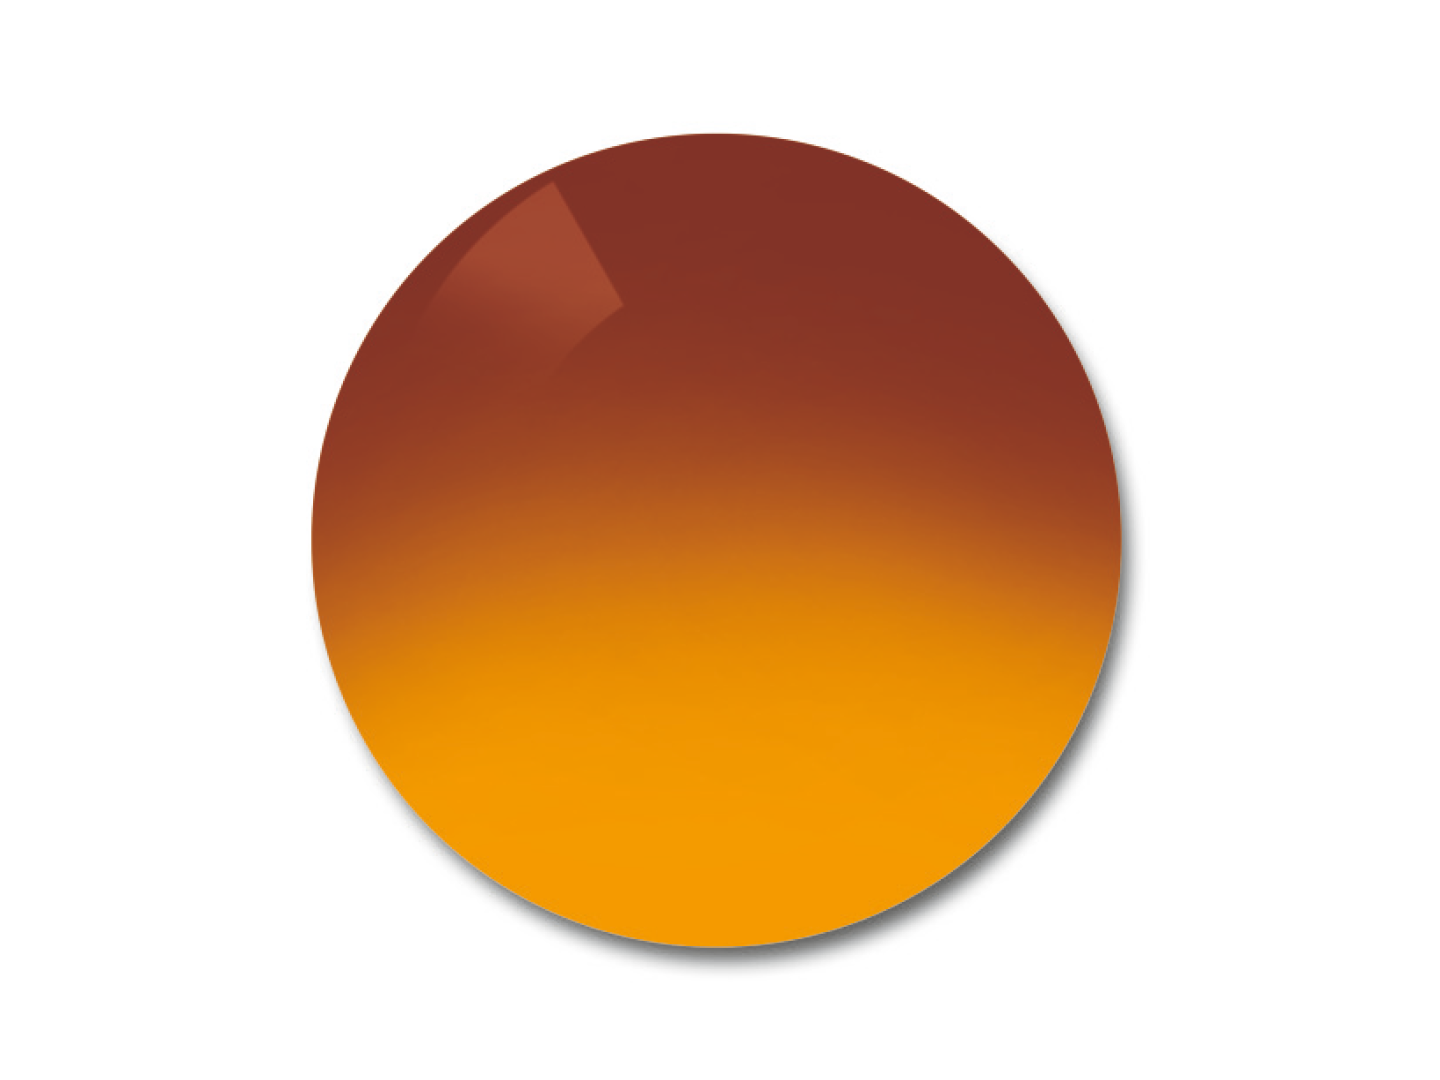 Colour example of the ProGolf Gradient 75/25% lens tint. 